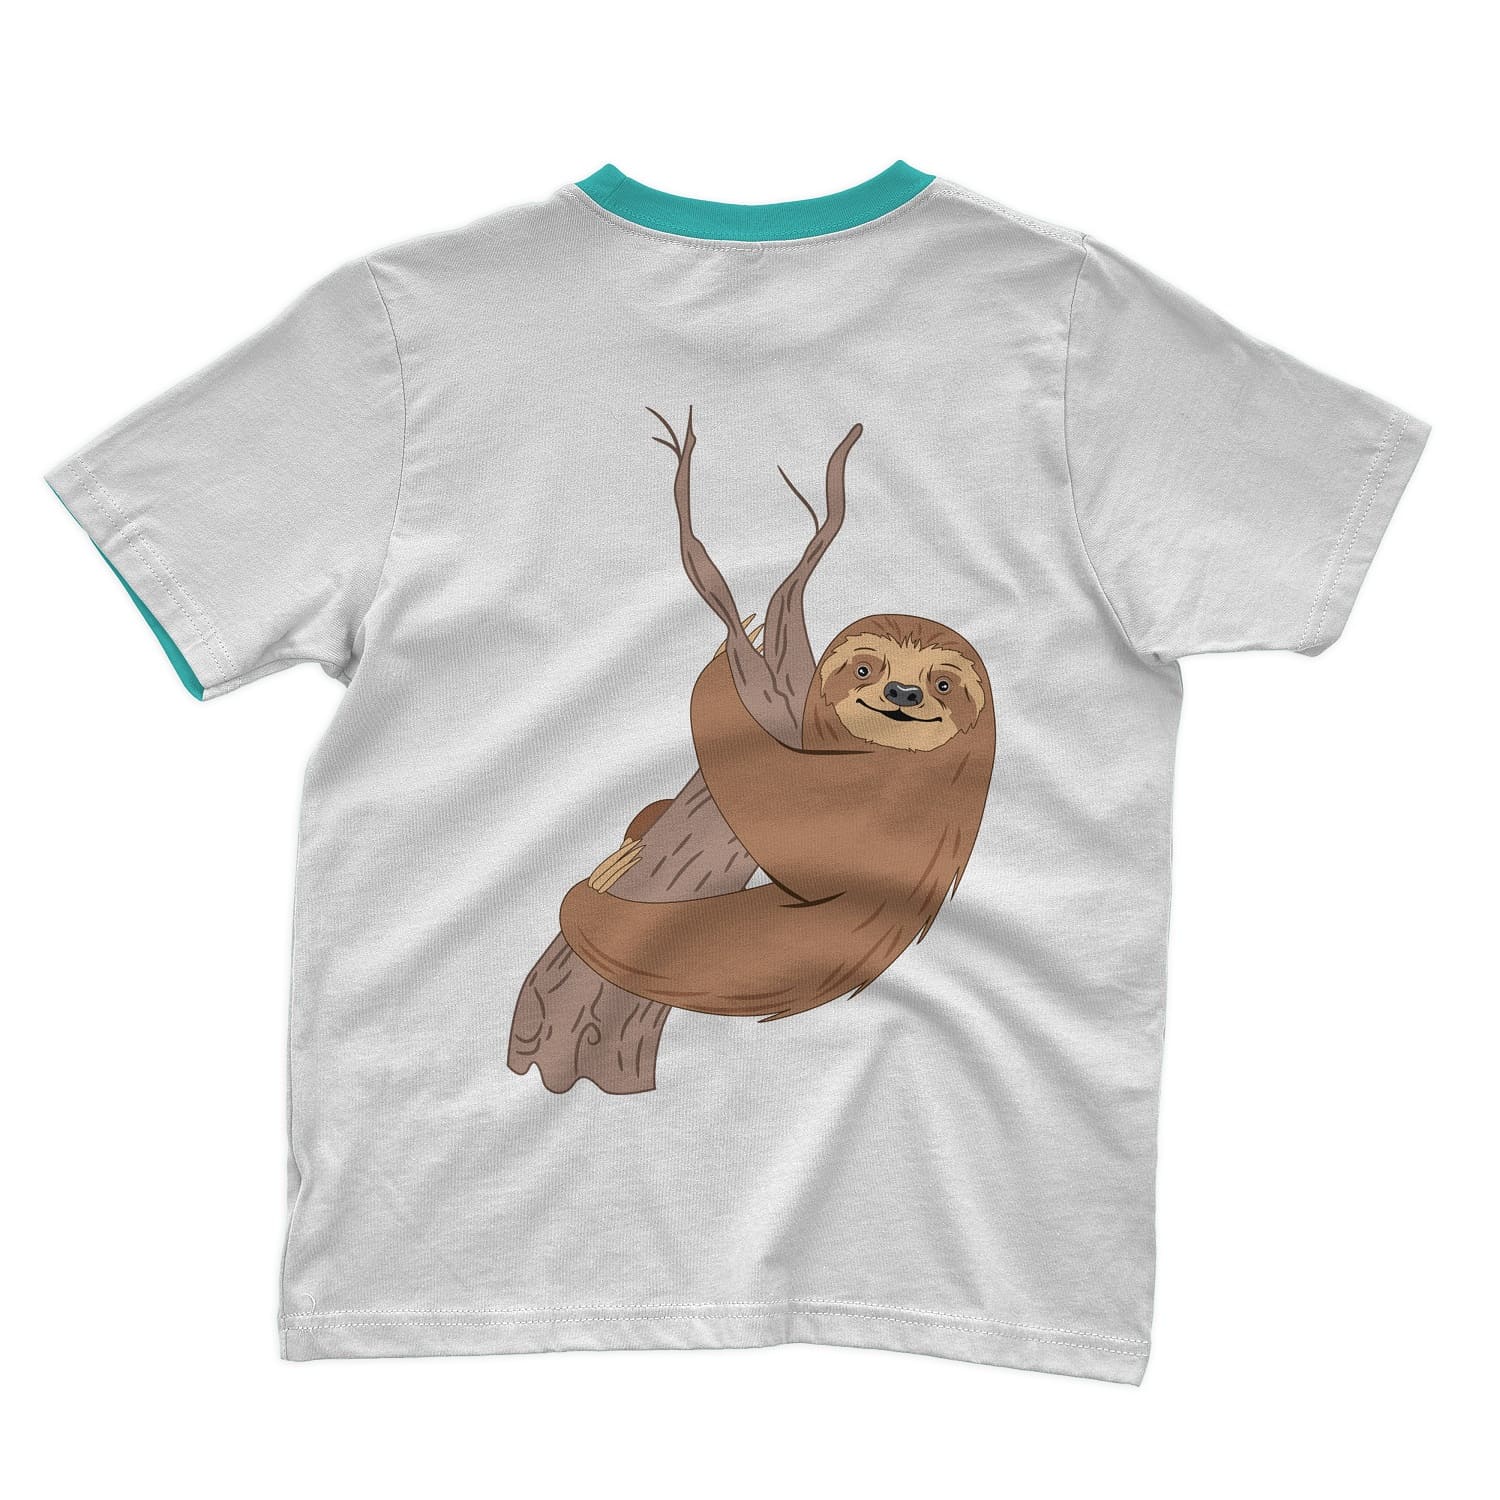 The gray T-shirt depicts a sloth hanging on a wooden branch.